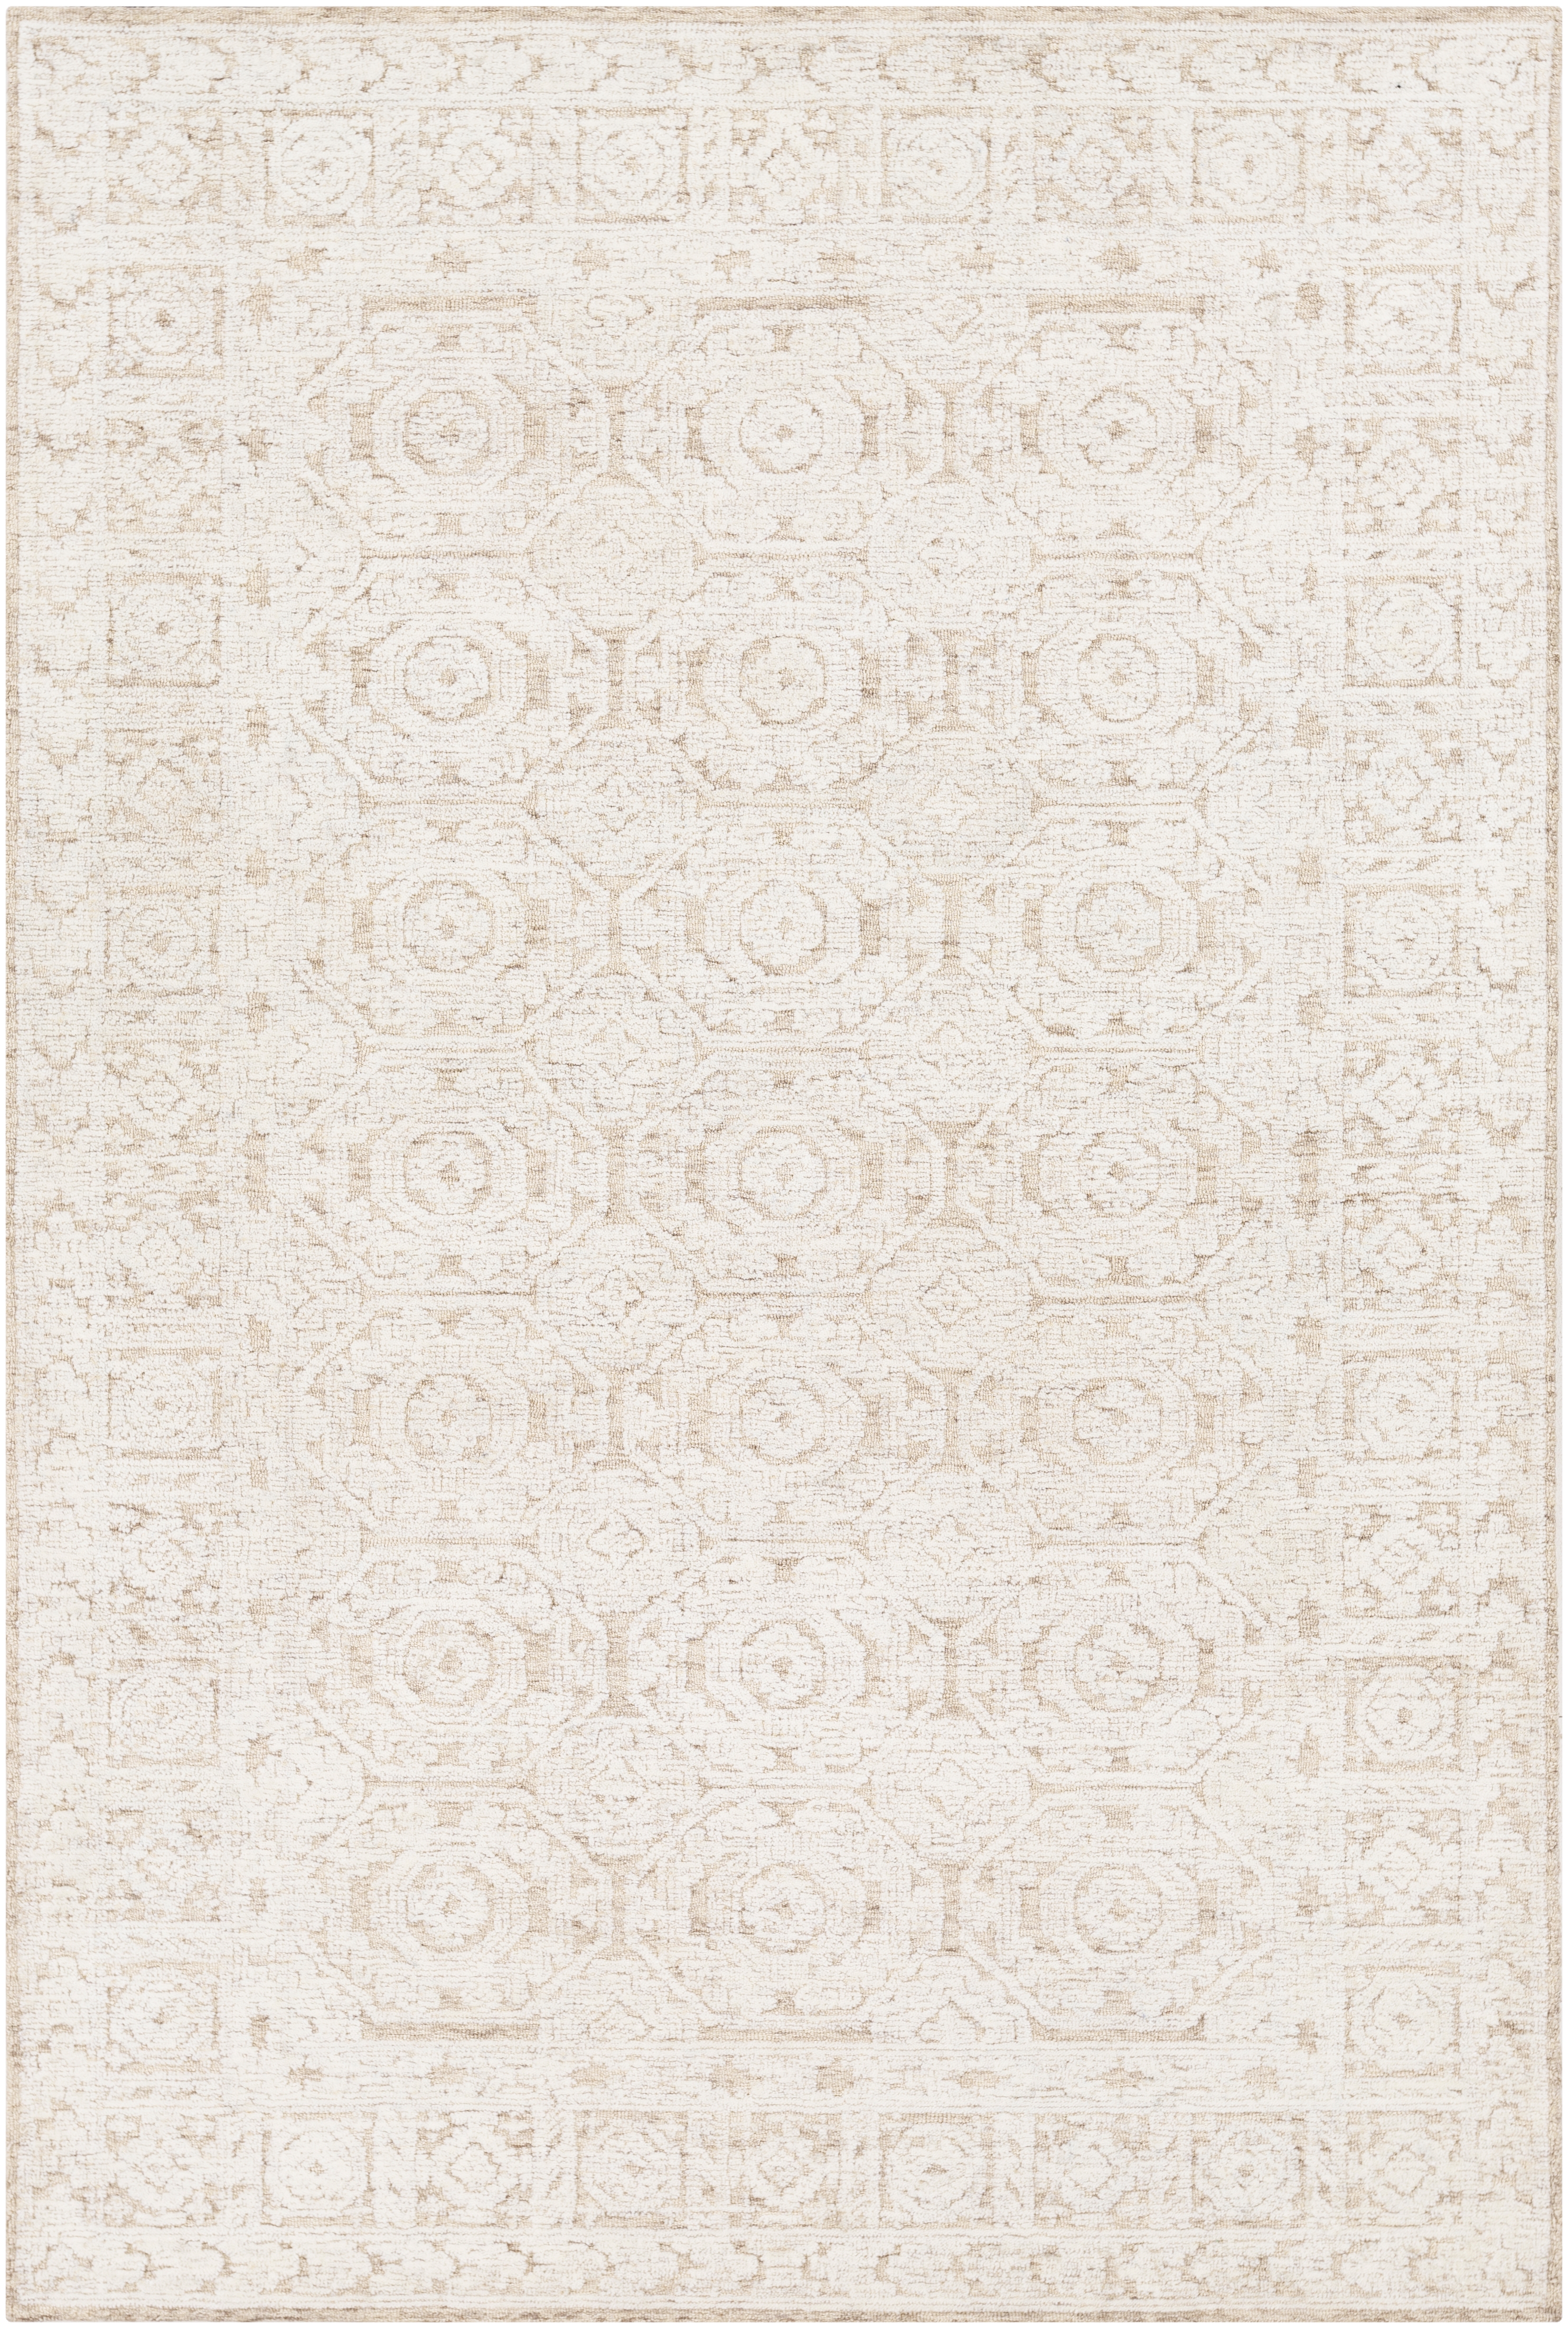 Louvre Rug, 5' x 7'6" - Image 0